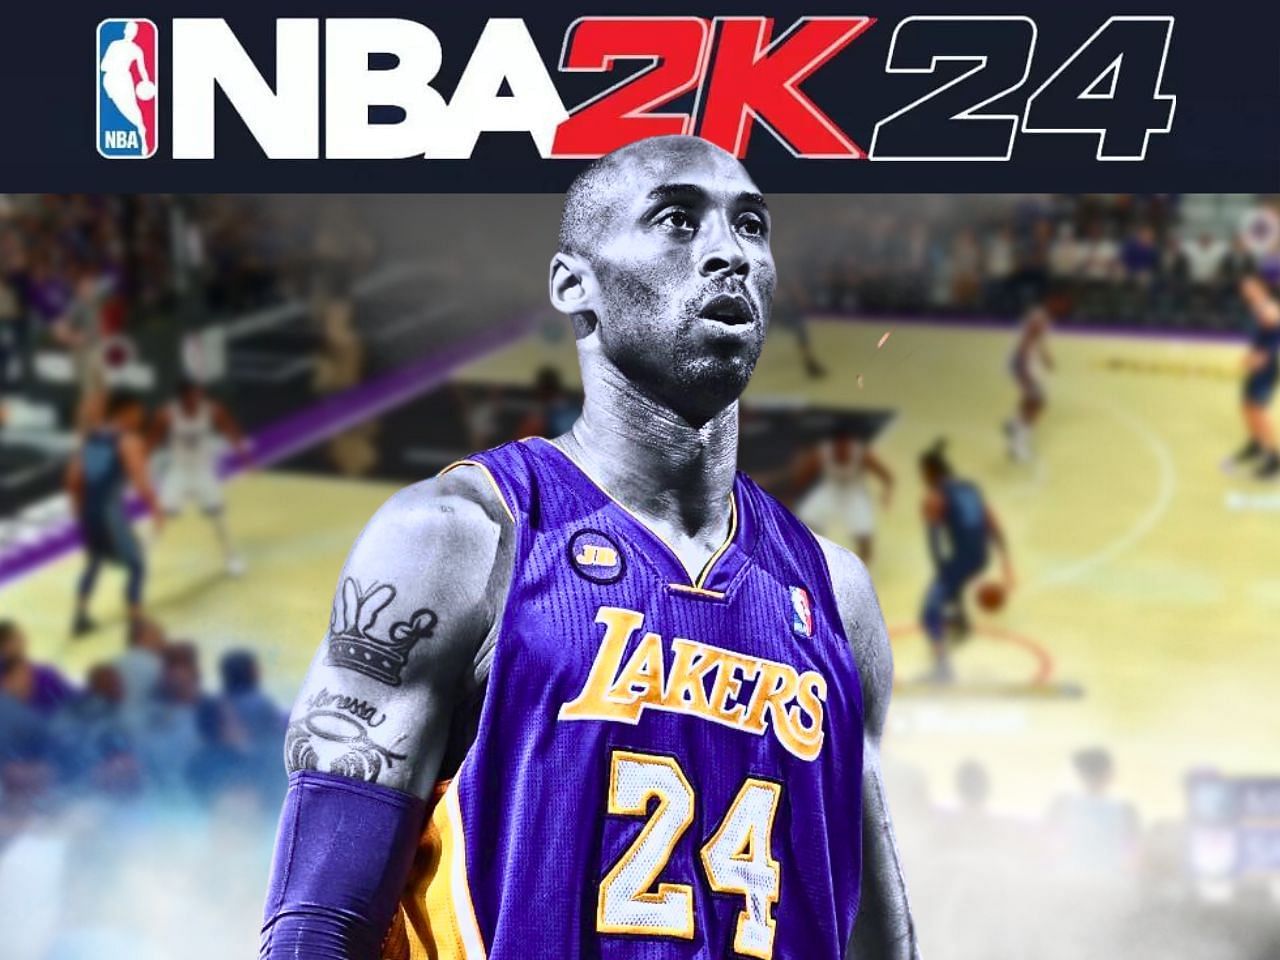 Kobe Bryant featured on NBA 2k24 cover, all you need to know